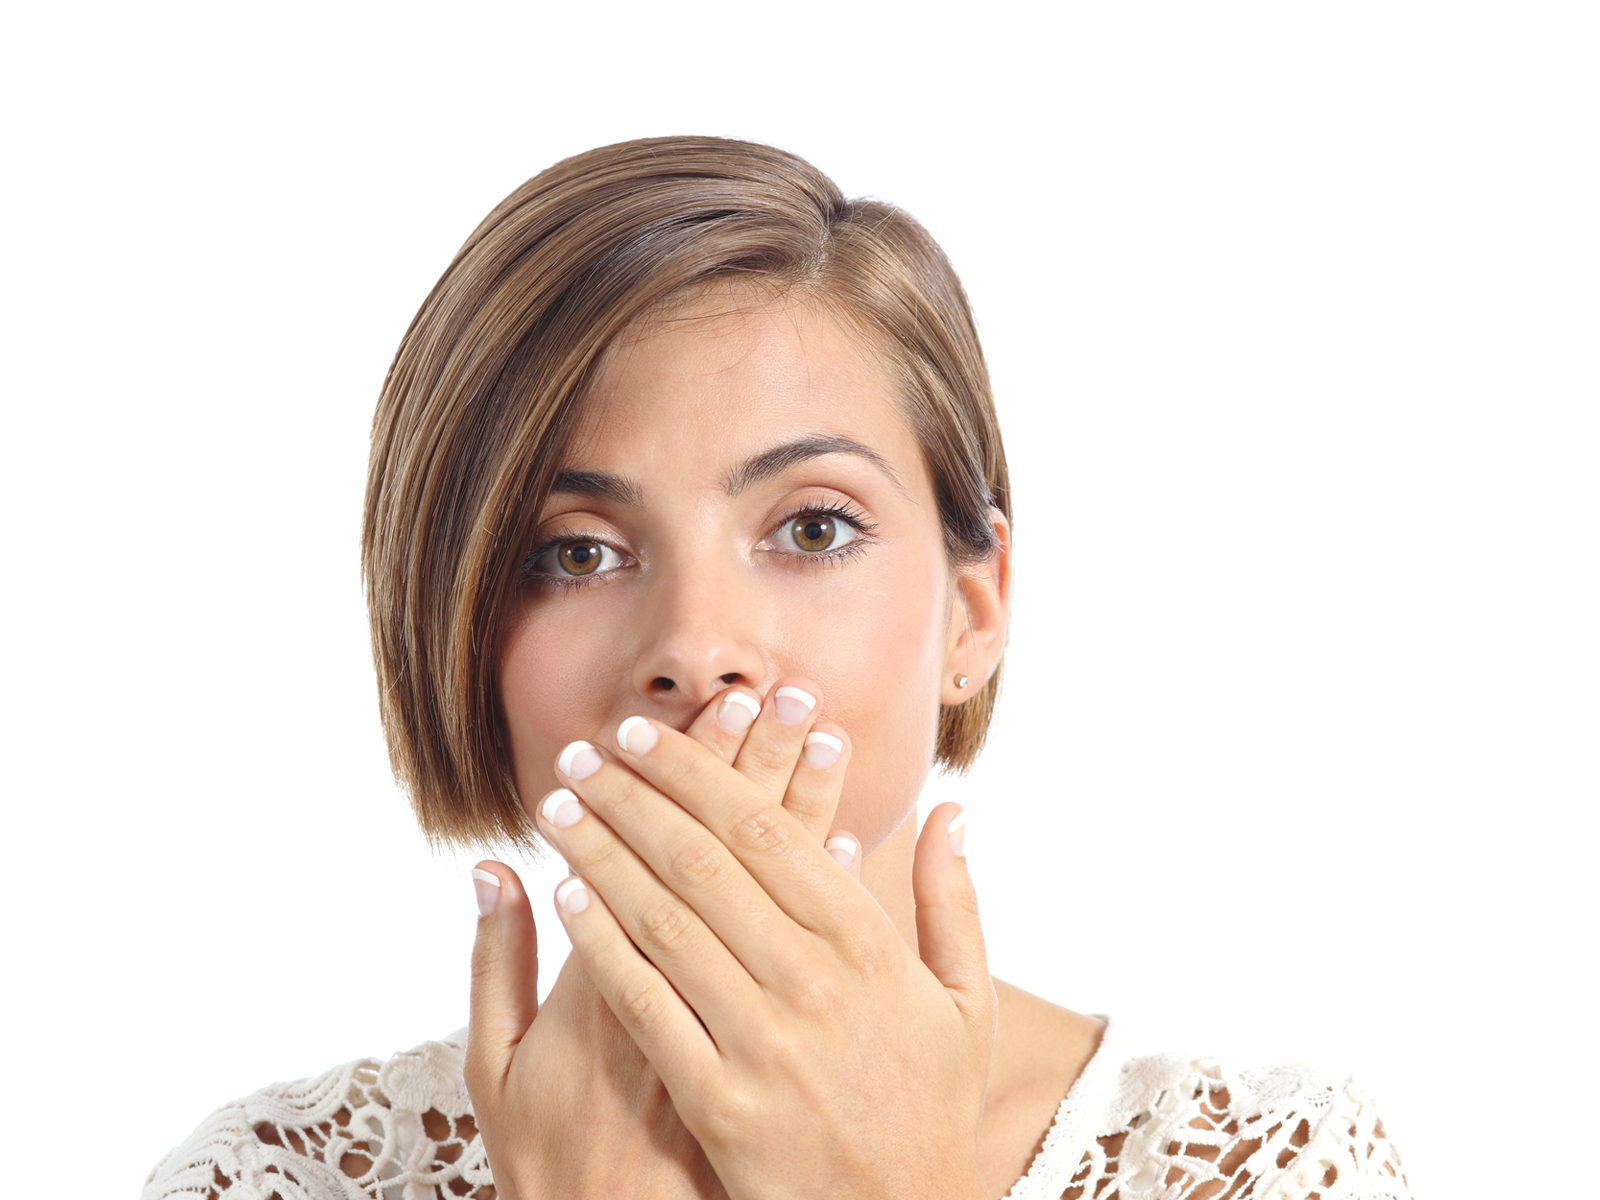 Can You Permanently Get Rid of Bad Breath?